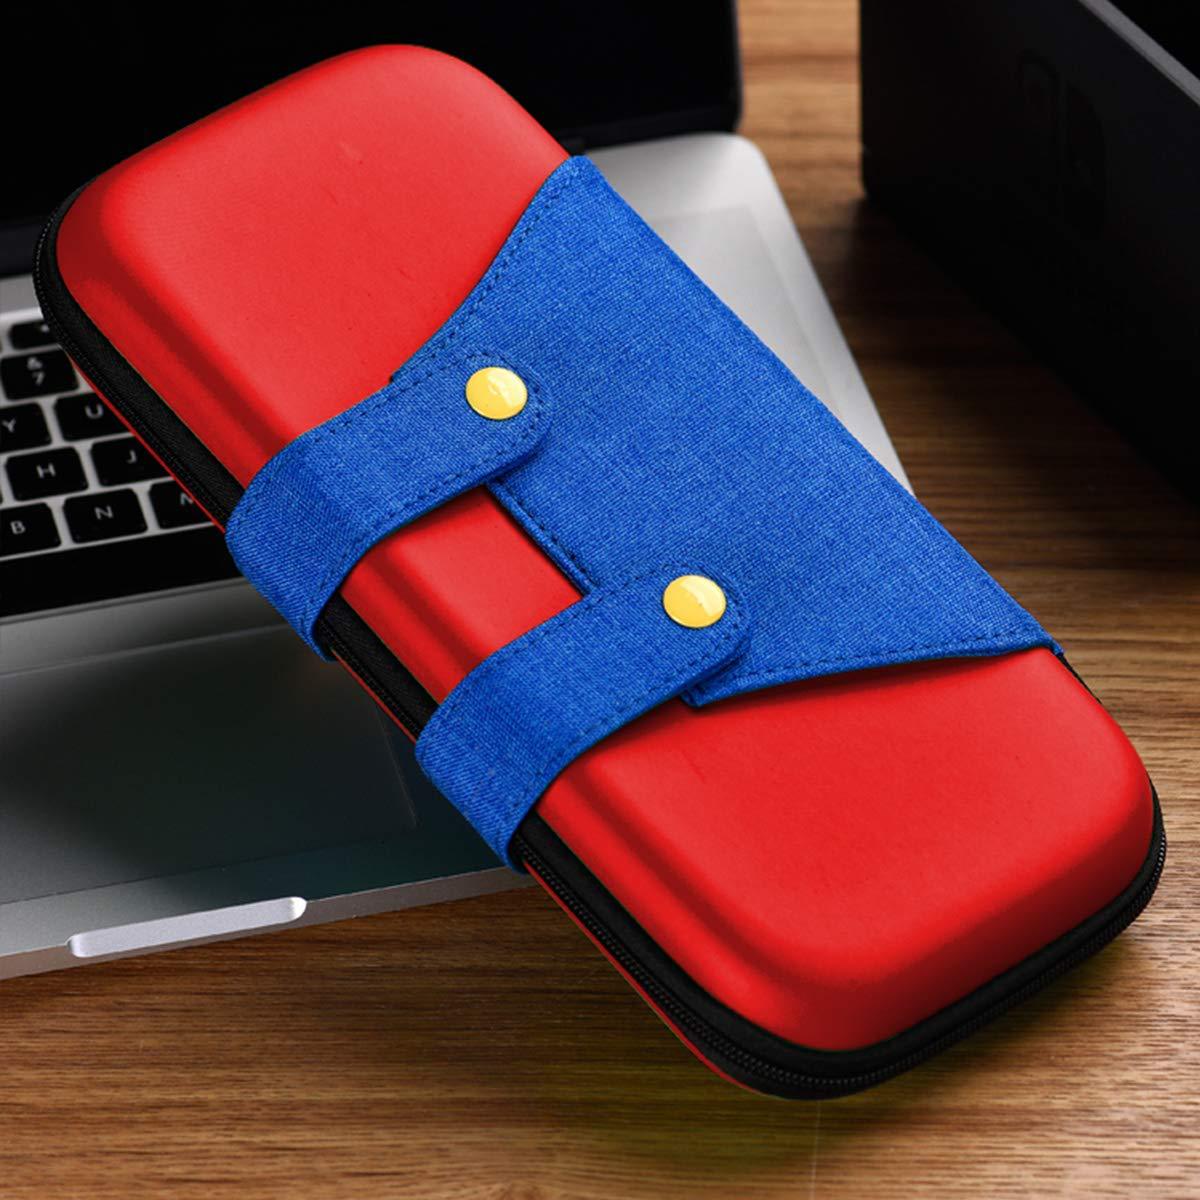 Mini Wear-resistant Portable Storage Bag Carrying Case for Switch Game Console